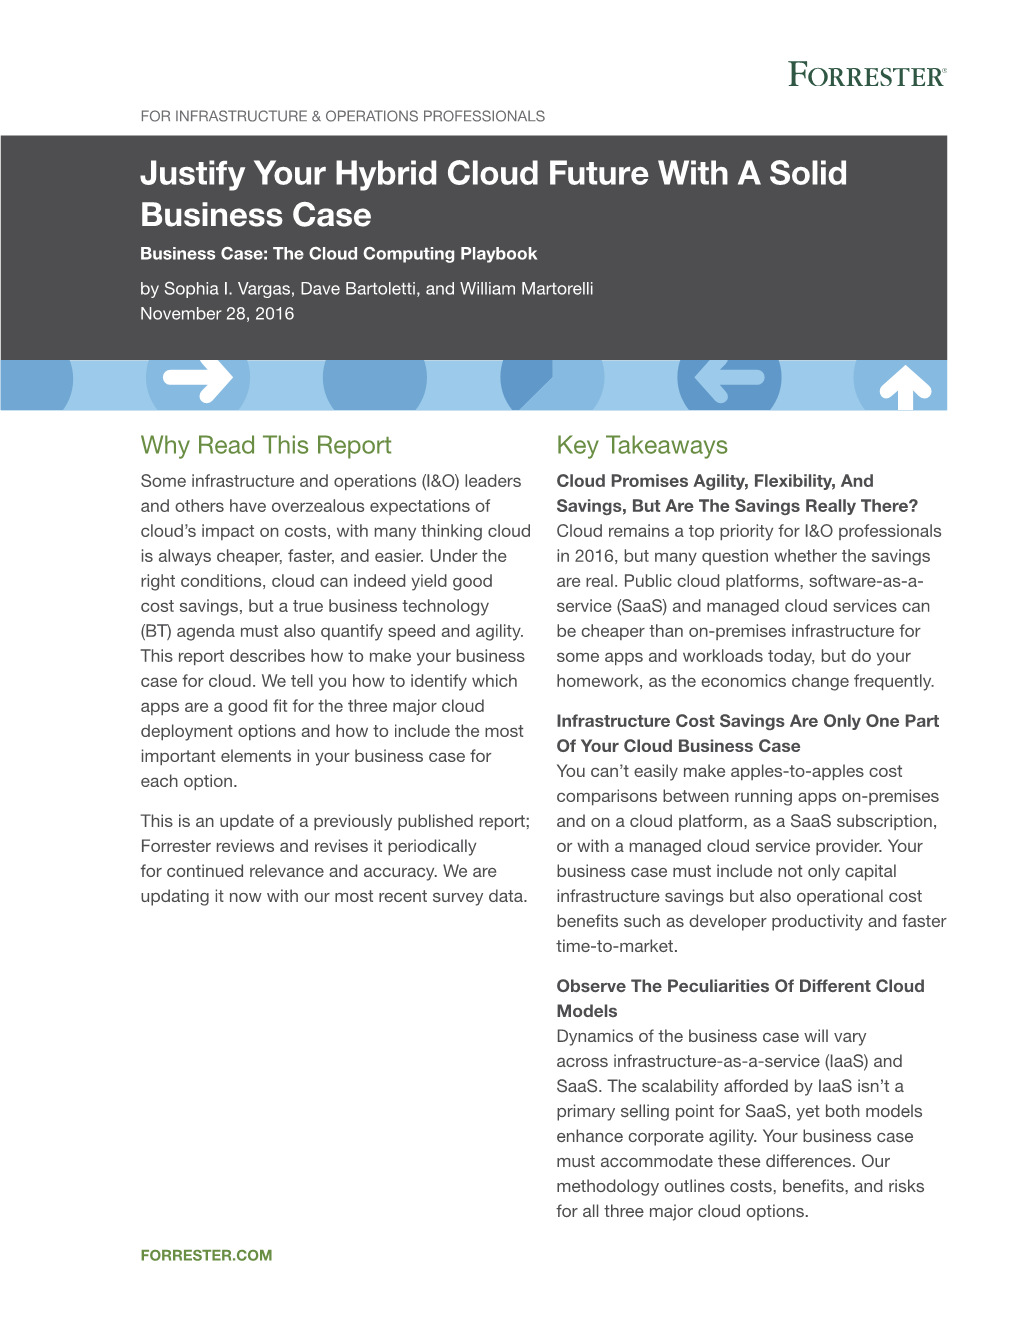 Justify Your Hybrid Cloud Future with a Solid Business Case Business Case: the Cloud Computing Playbook by Sophia I